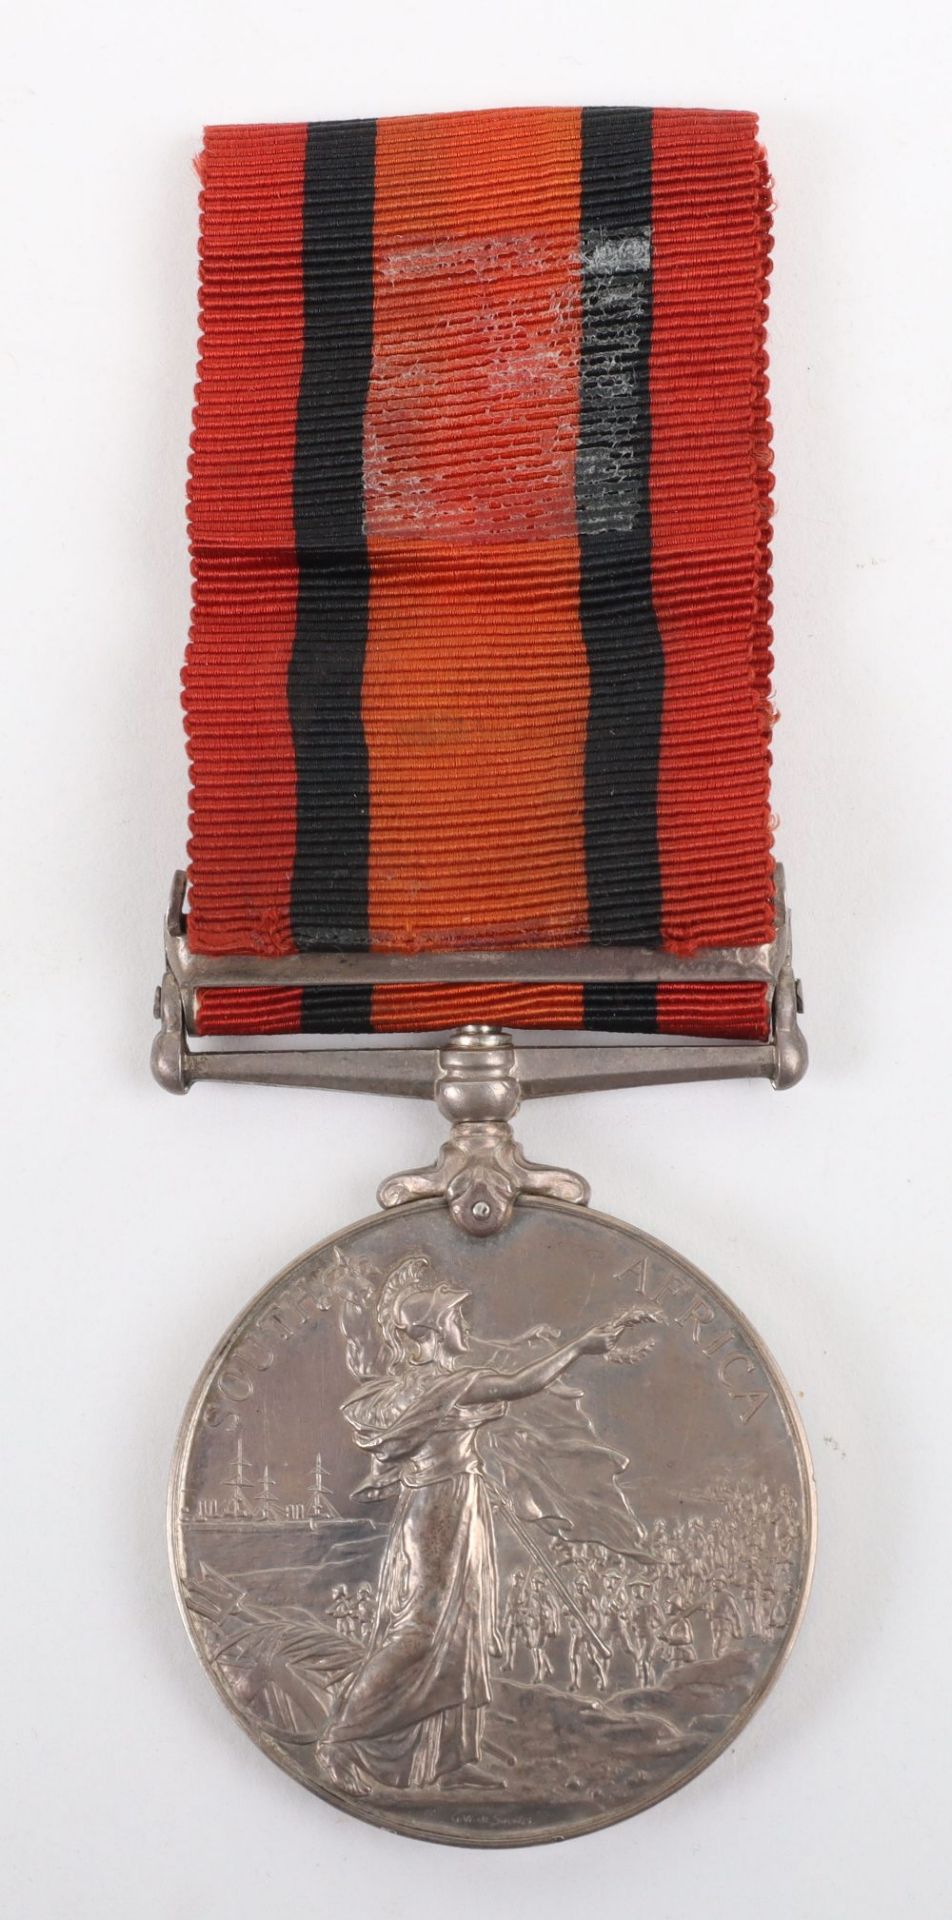 Queens South Africa Medal Awarded to the Natal Naval Volunteers for the Defence of Ladysmith - Image 2 of 4